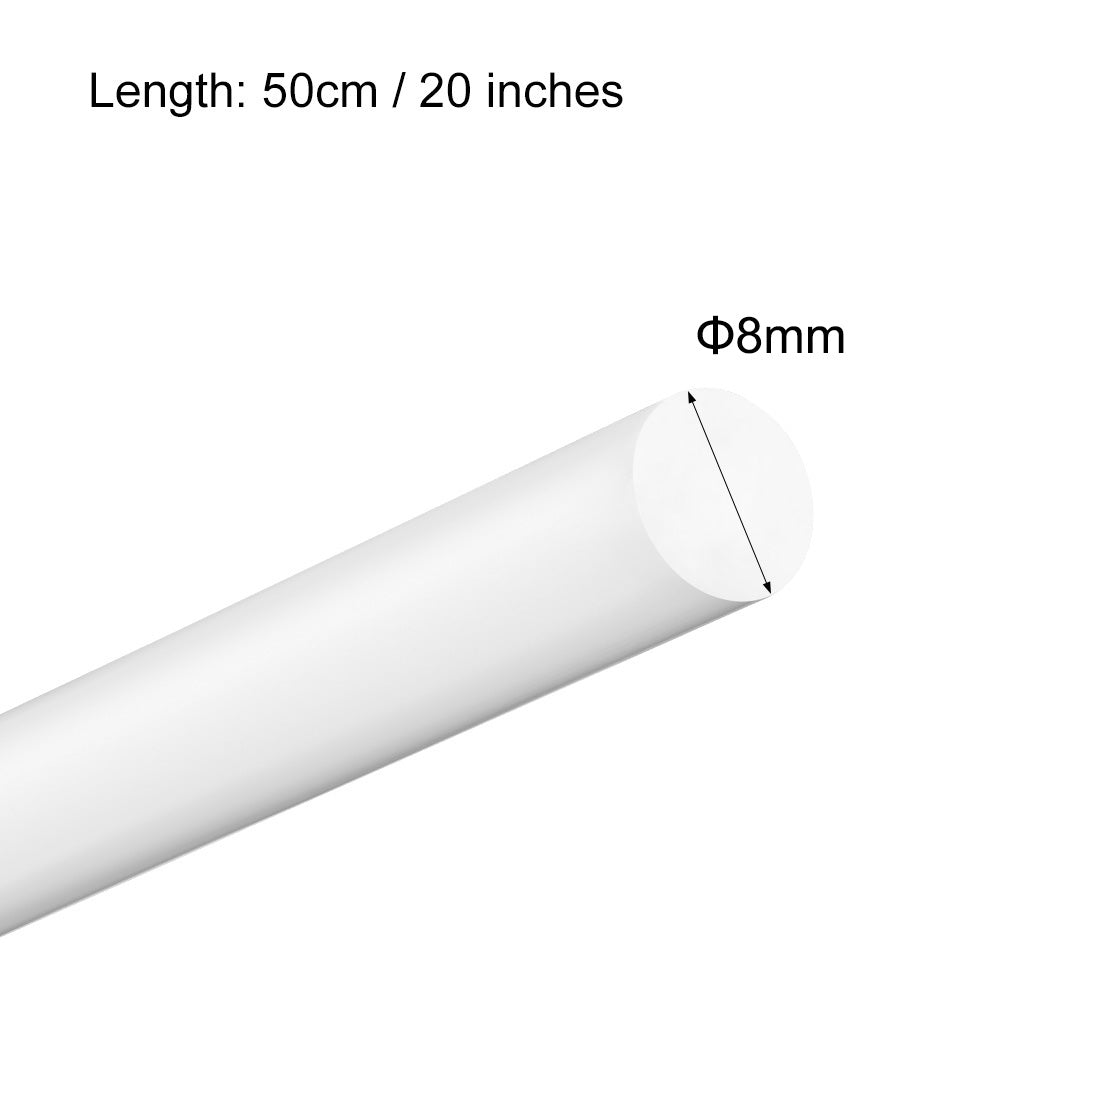 uxcell Uxcell Plastic Round Rod,8mm Dia 50cm White Engineering Plastic Round Bar 3pcs